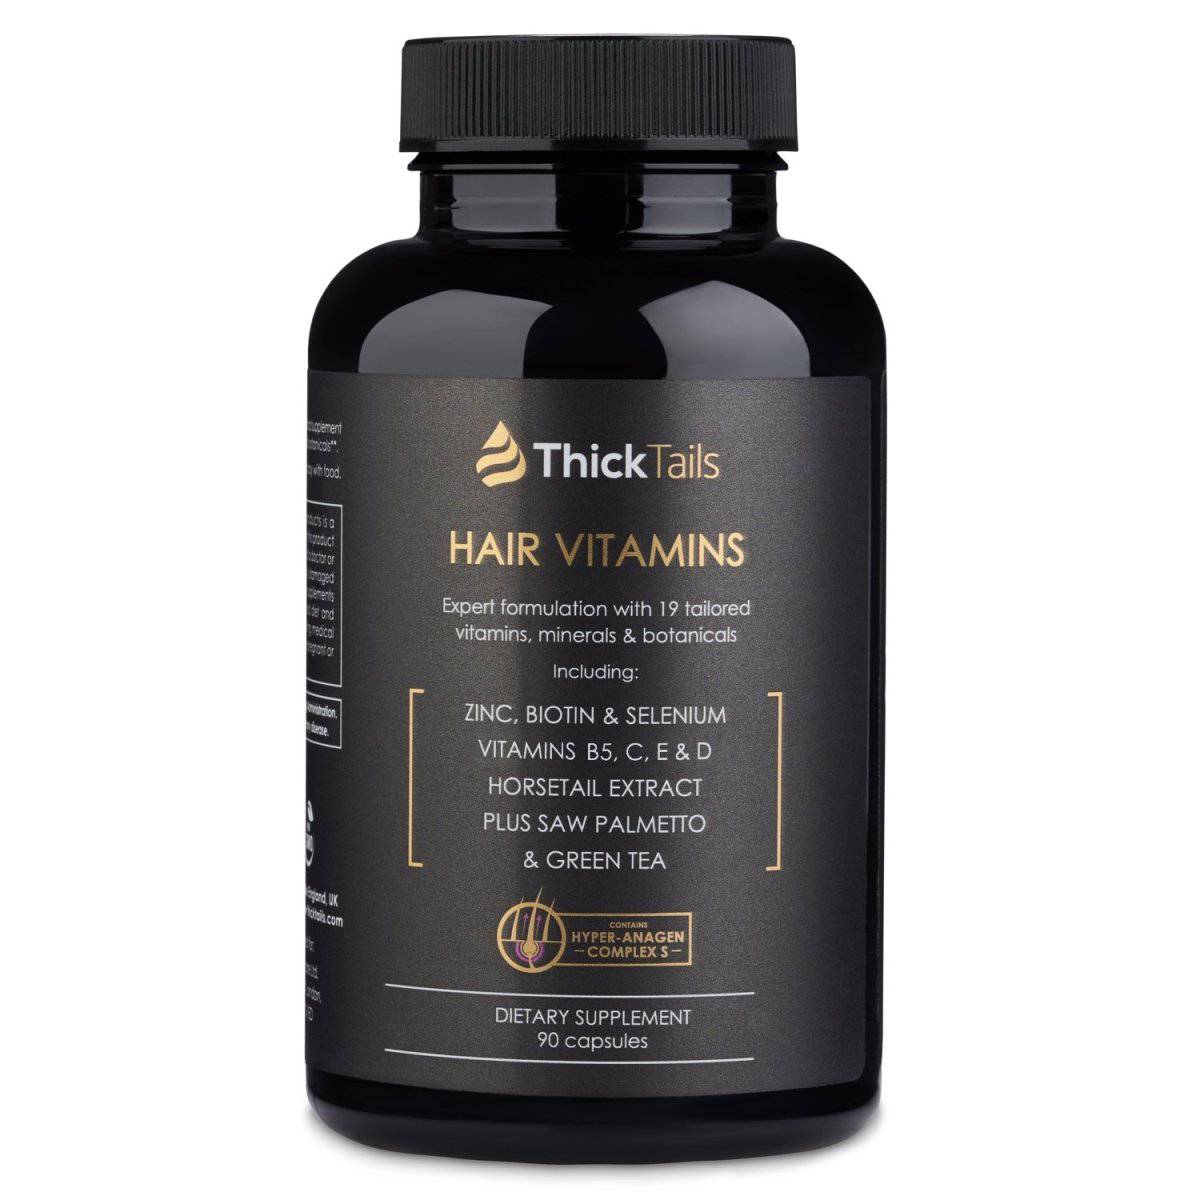 ThickTails Hair Growth & Strengthening Vitamins | 90 Capsules | 1 Month Supply